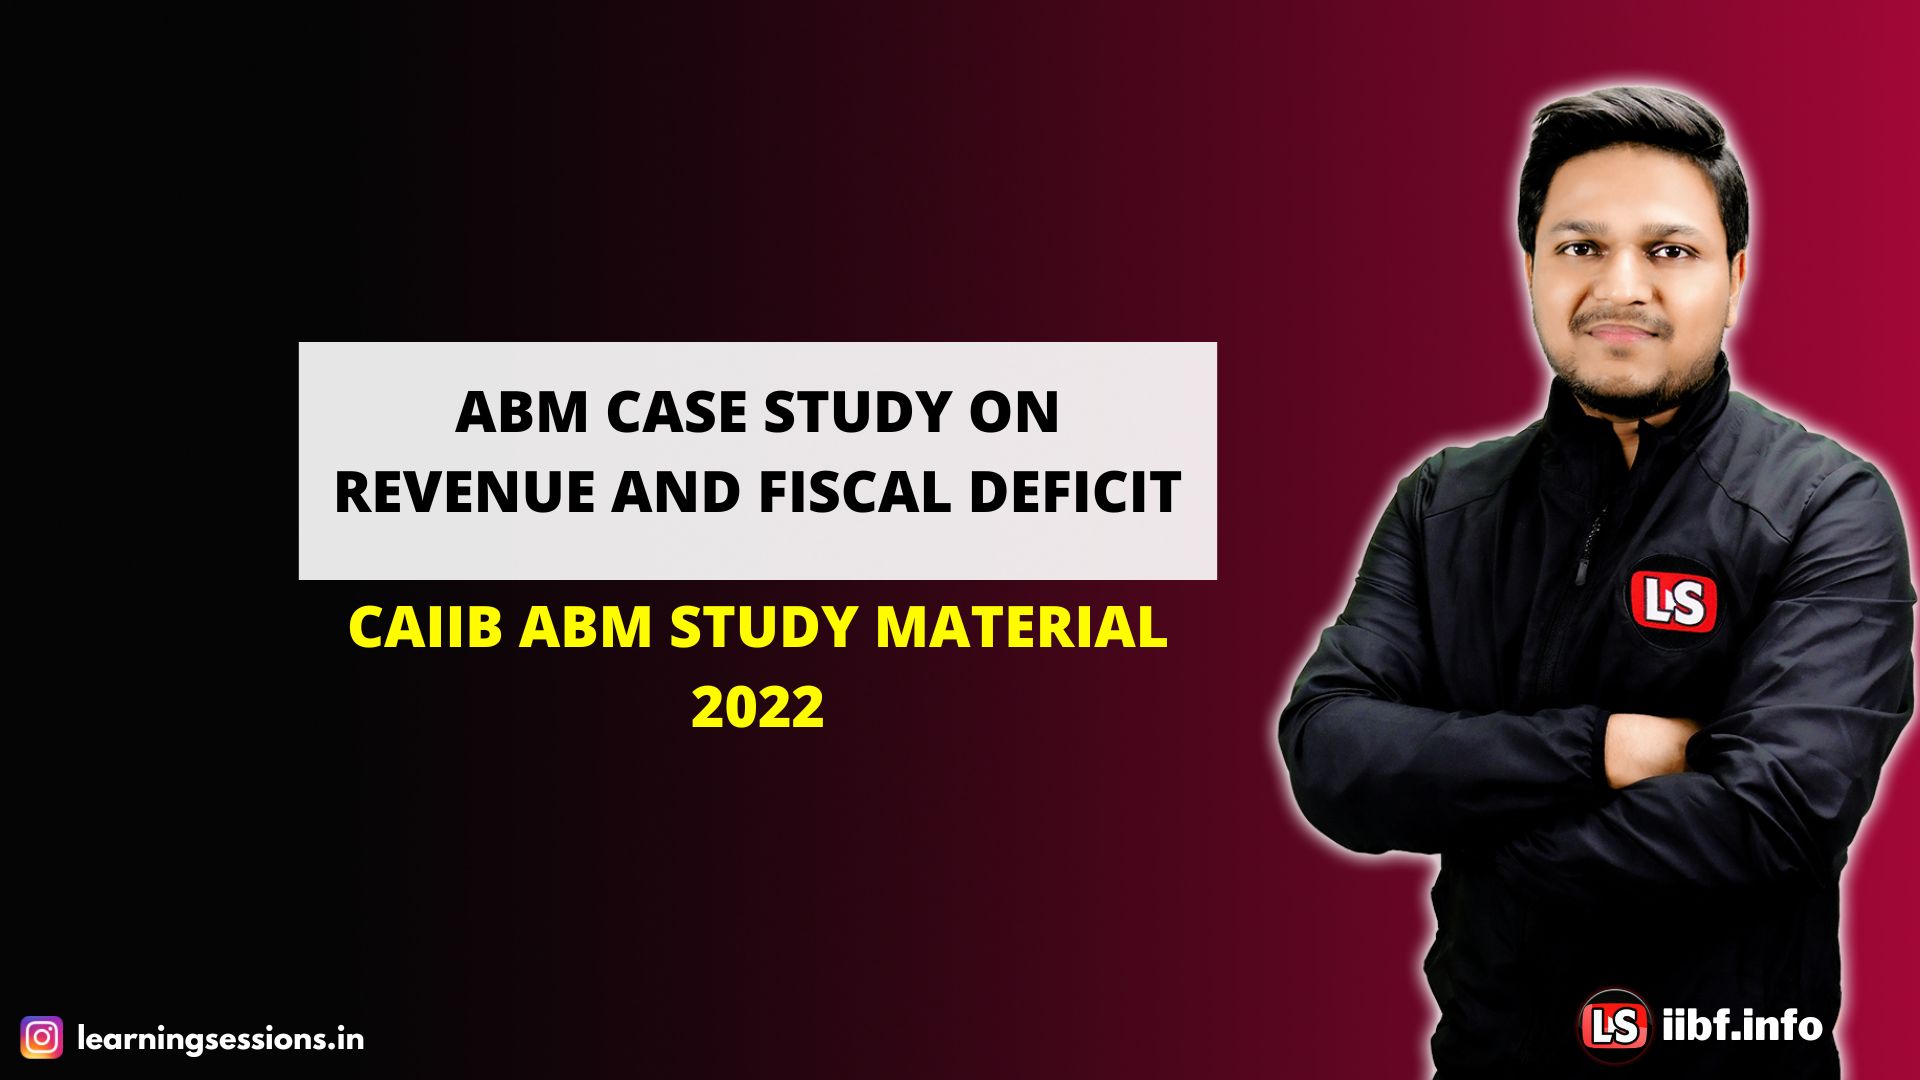 ABM CASE STUDY ON REVENUE AND FISCAL DEFICIT | CAIIB ABM STUDY MATERIAL 2022